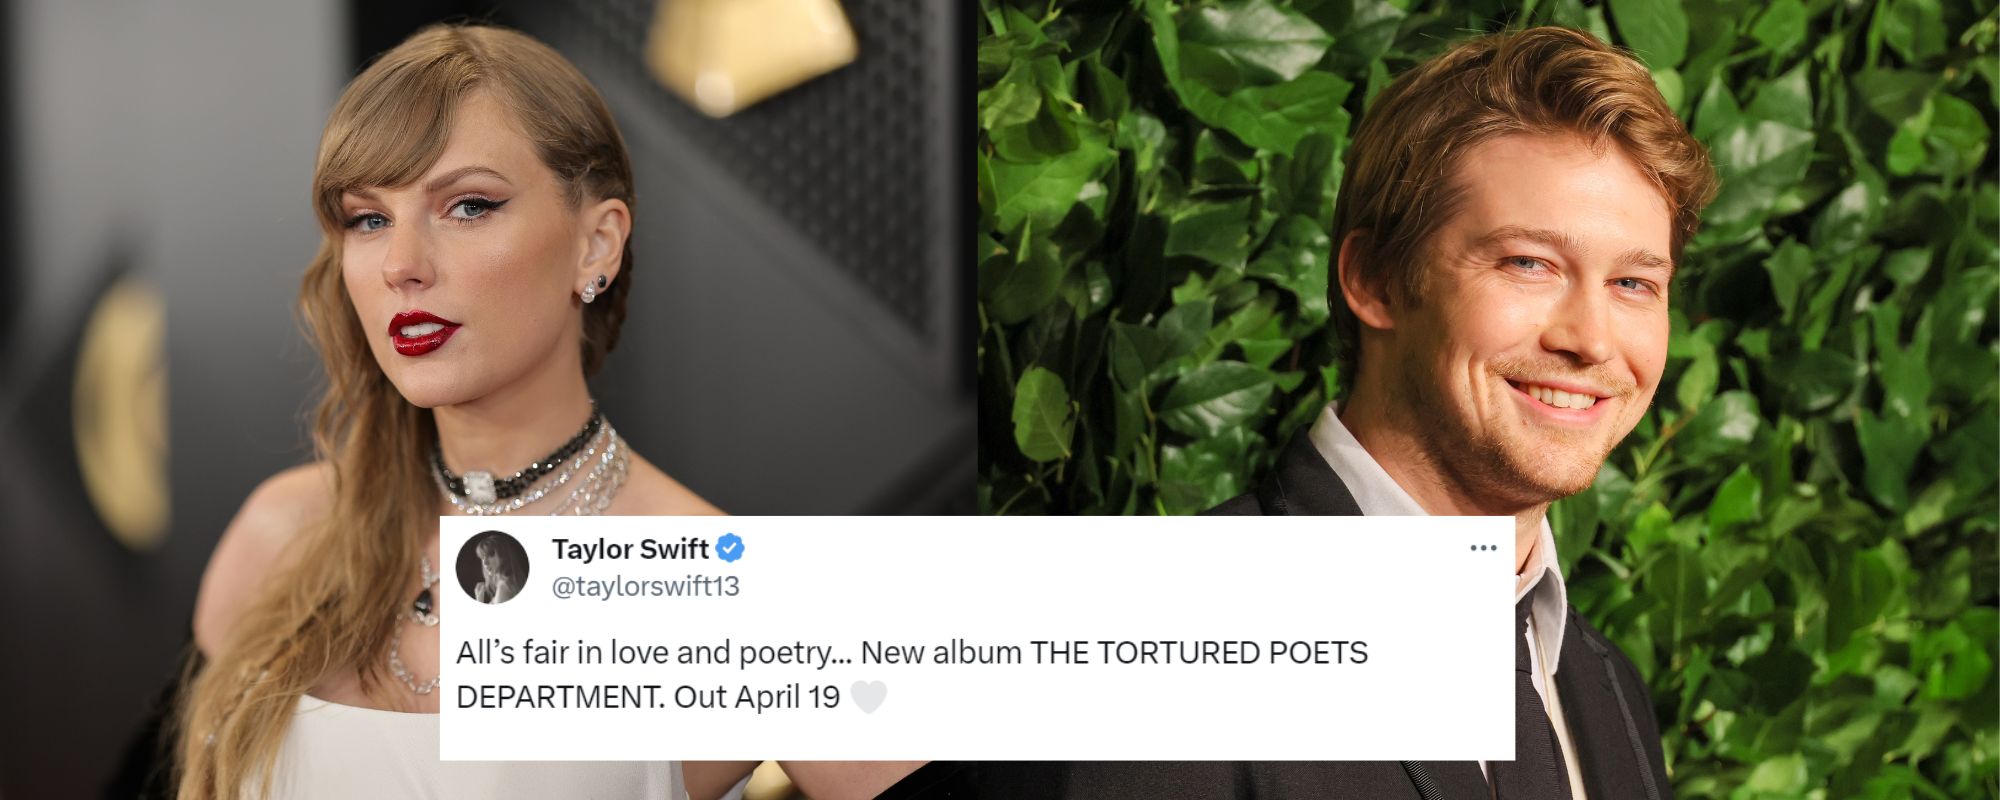 Who Is Joe Alwyn? Why Taylor Swift Fans Think “The Tortured Poets Department” Is About Him: A Timeline